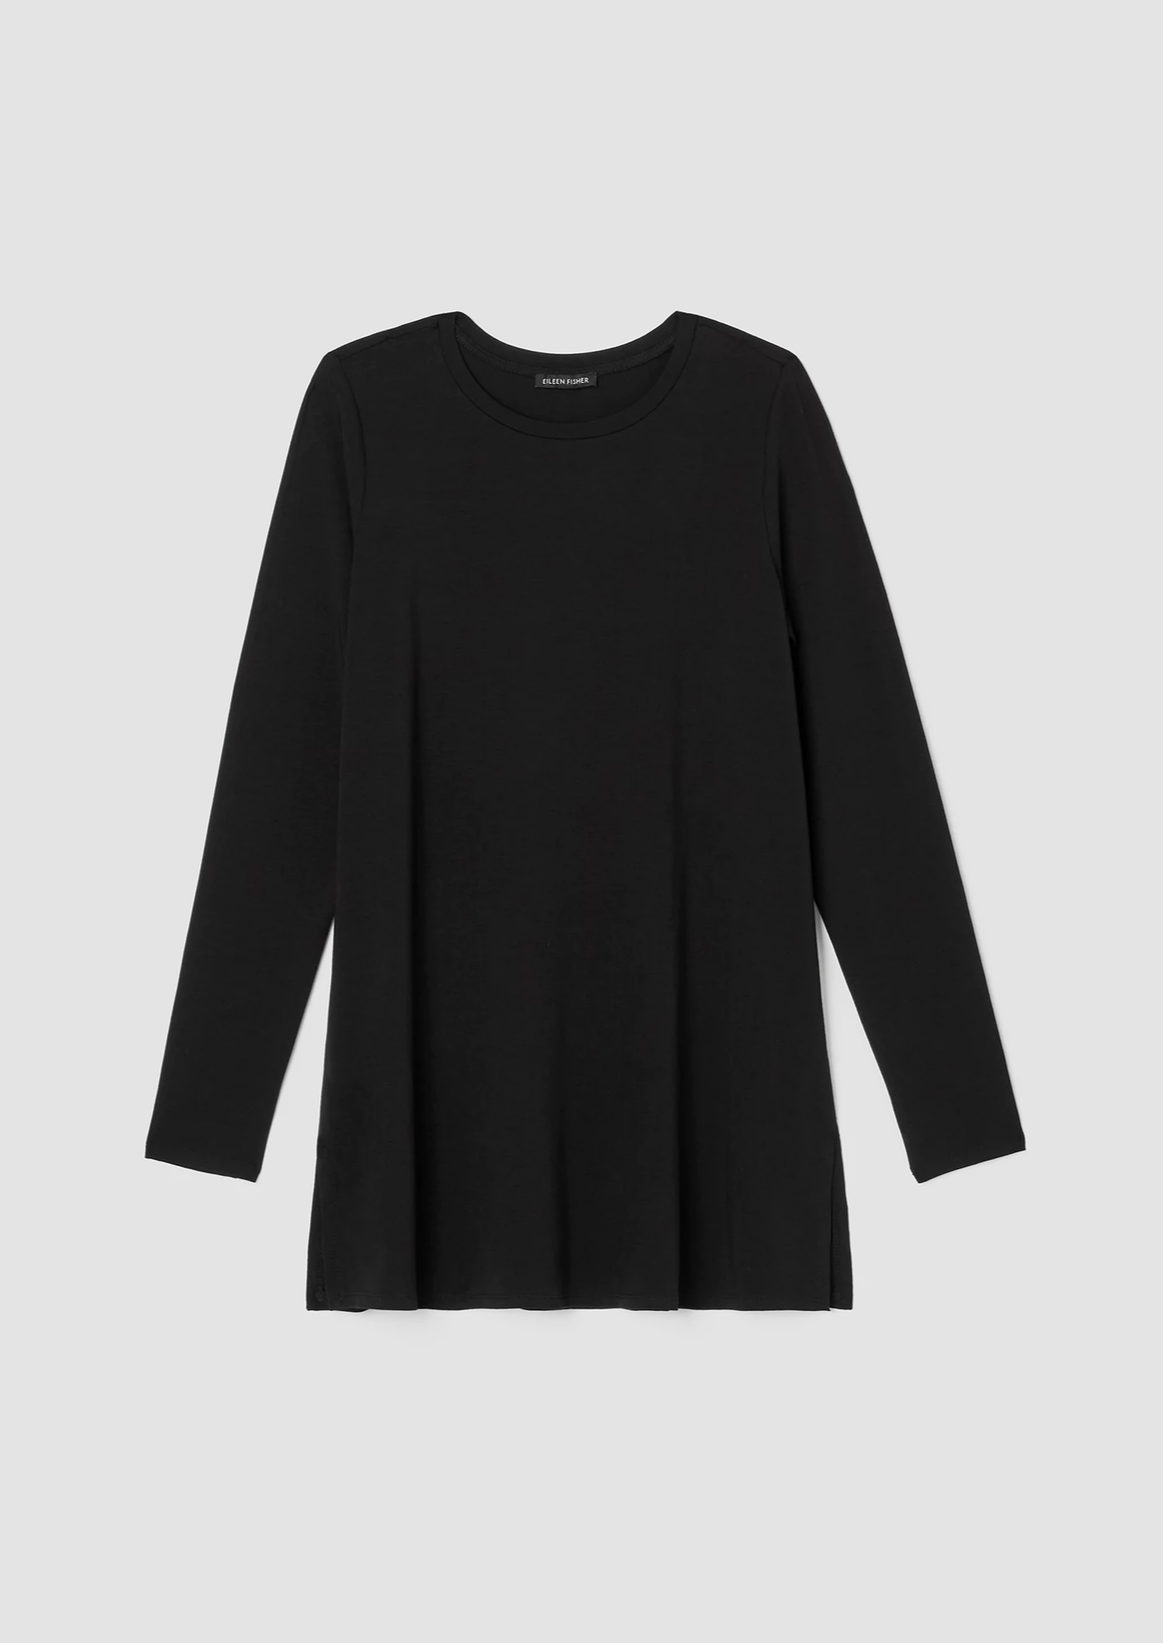 Eileen Fisher - Stretch Jersey Knit Crew Neck Long Top